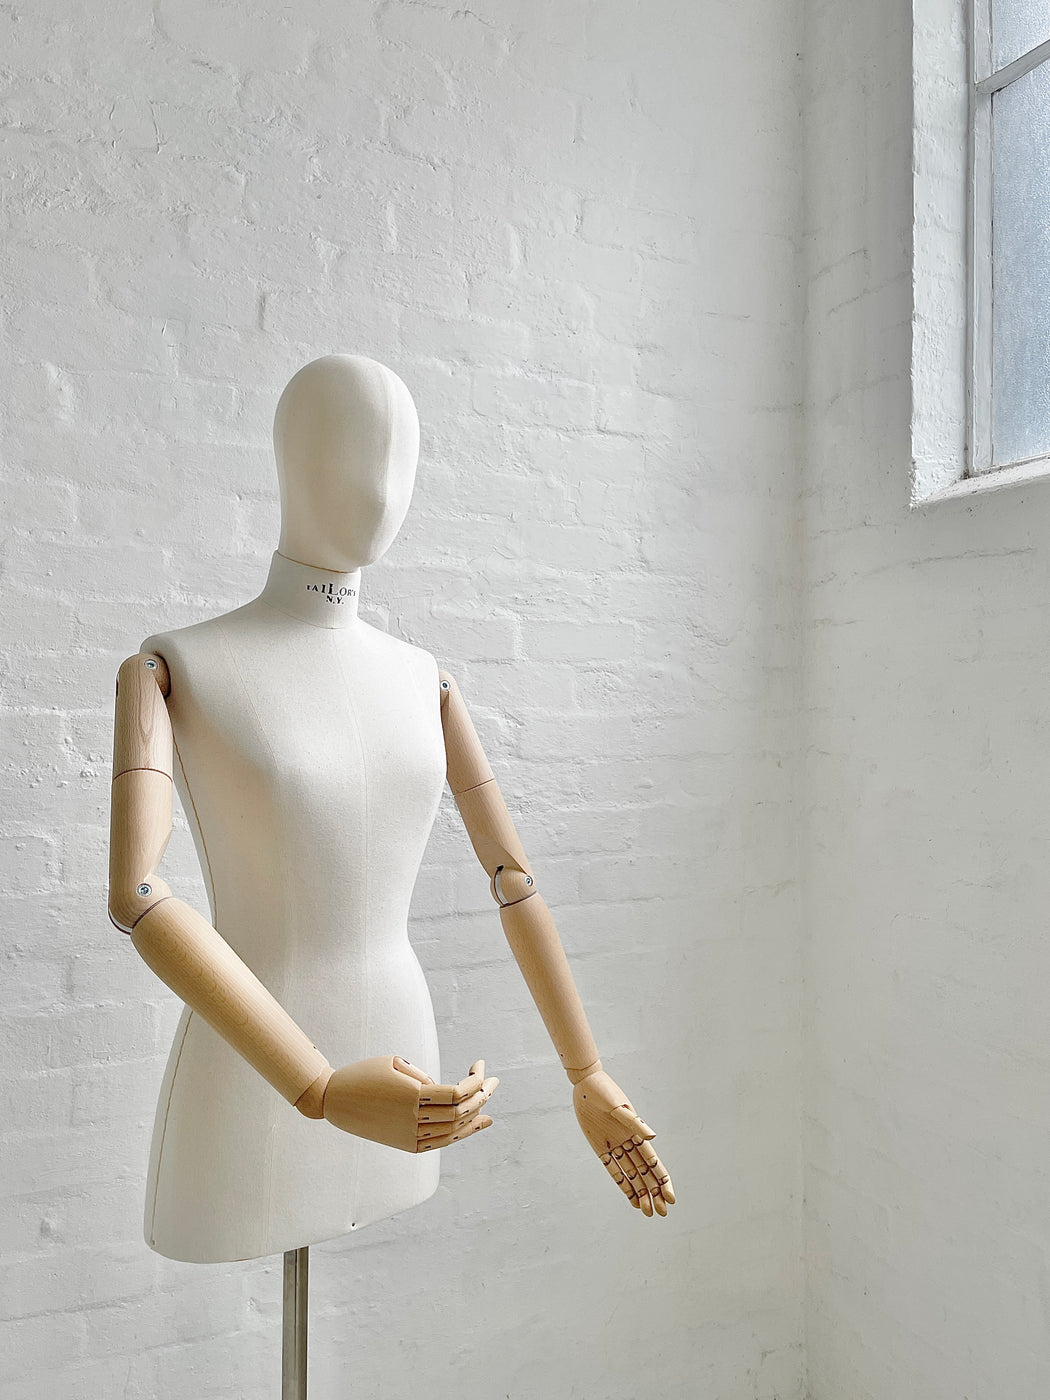 Italian Made Dress-makers Mannequin